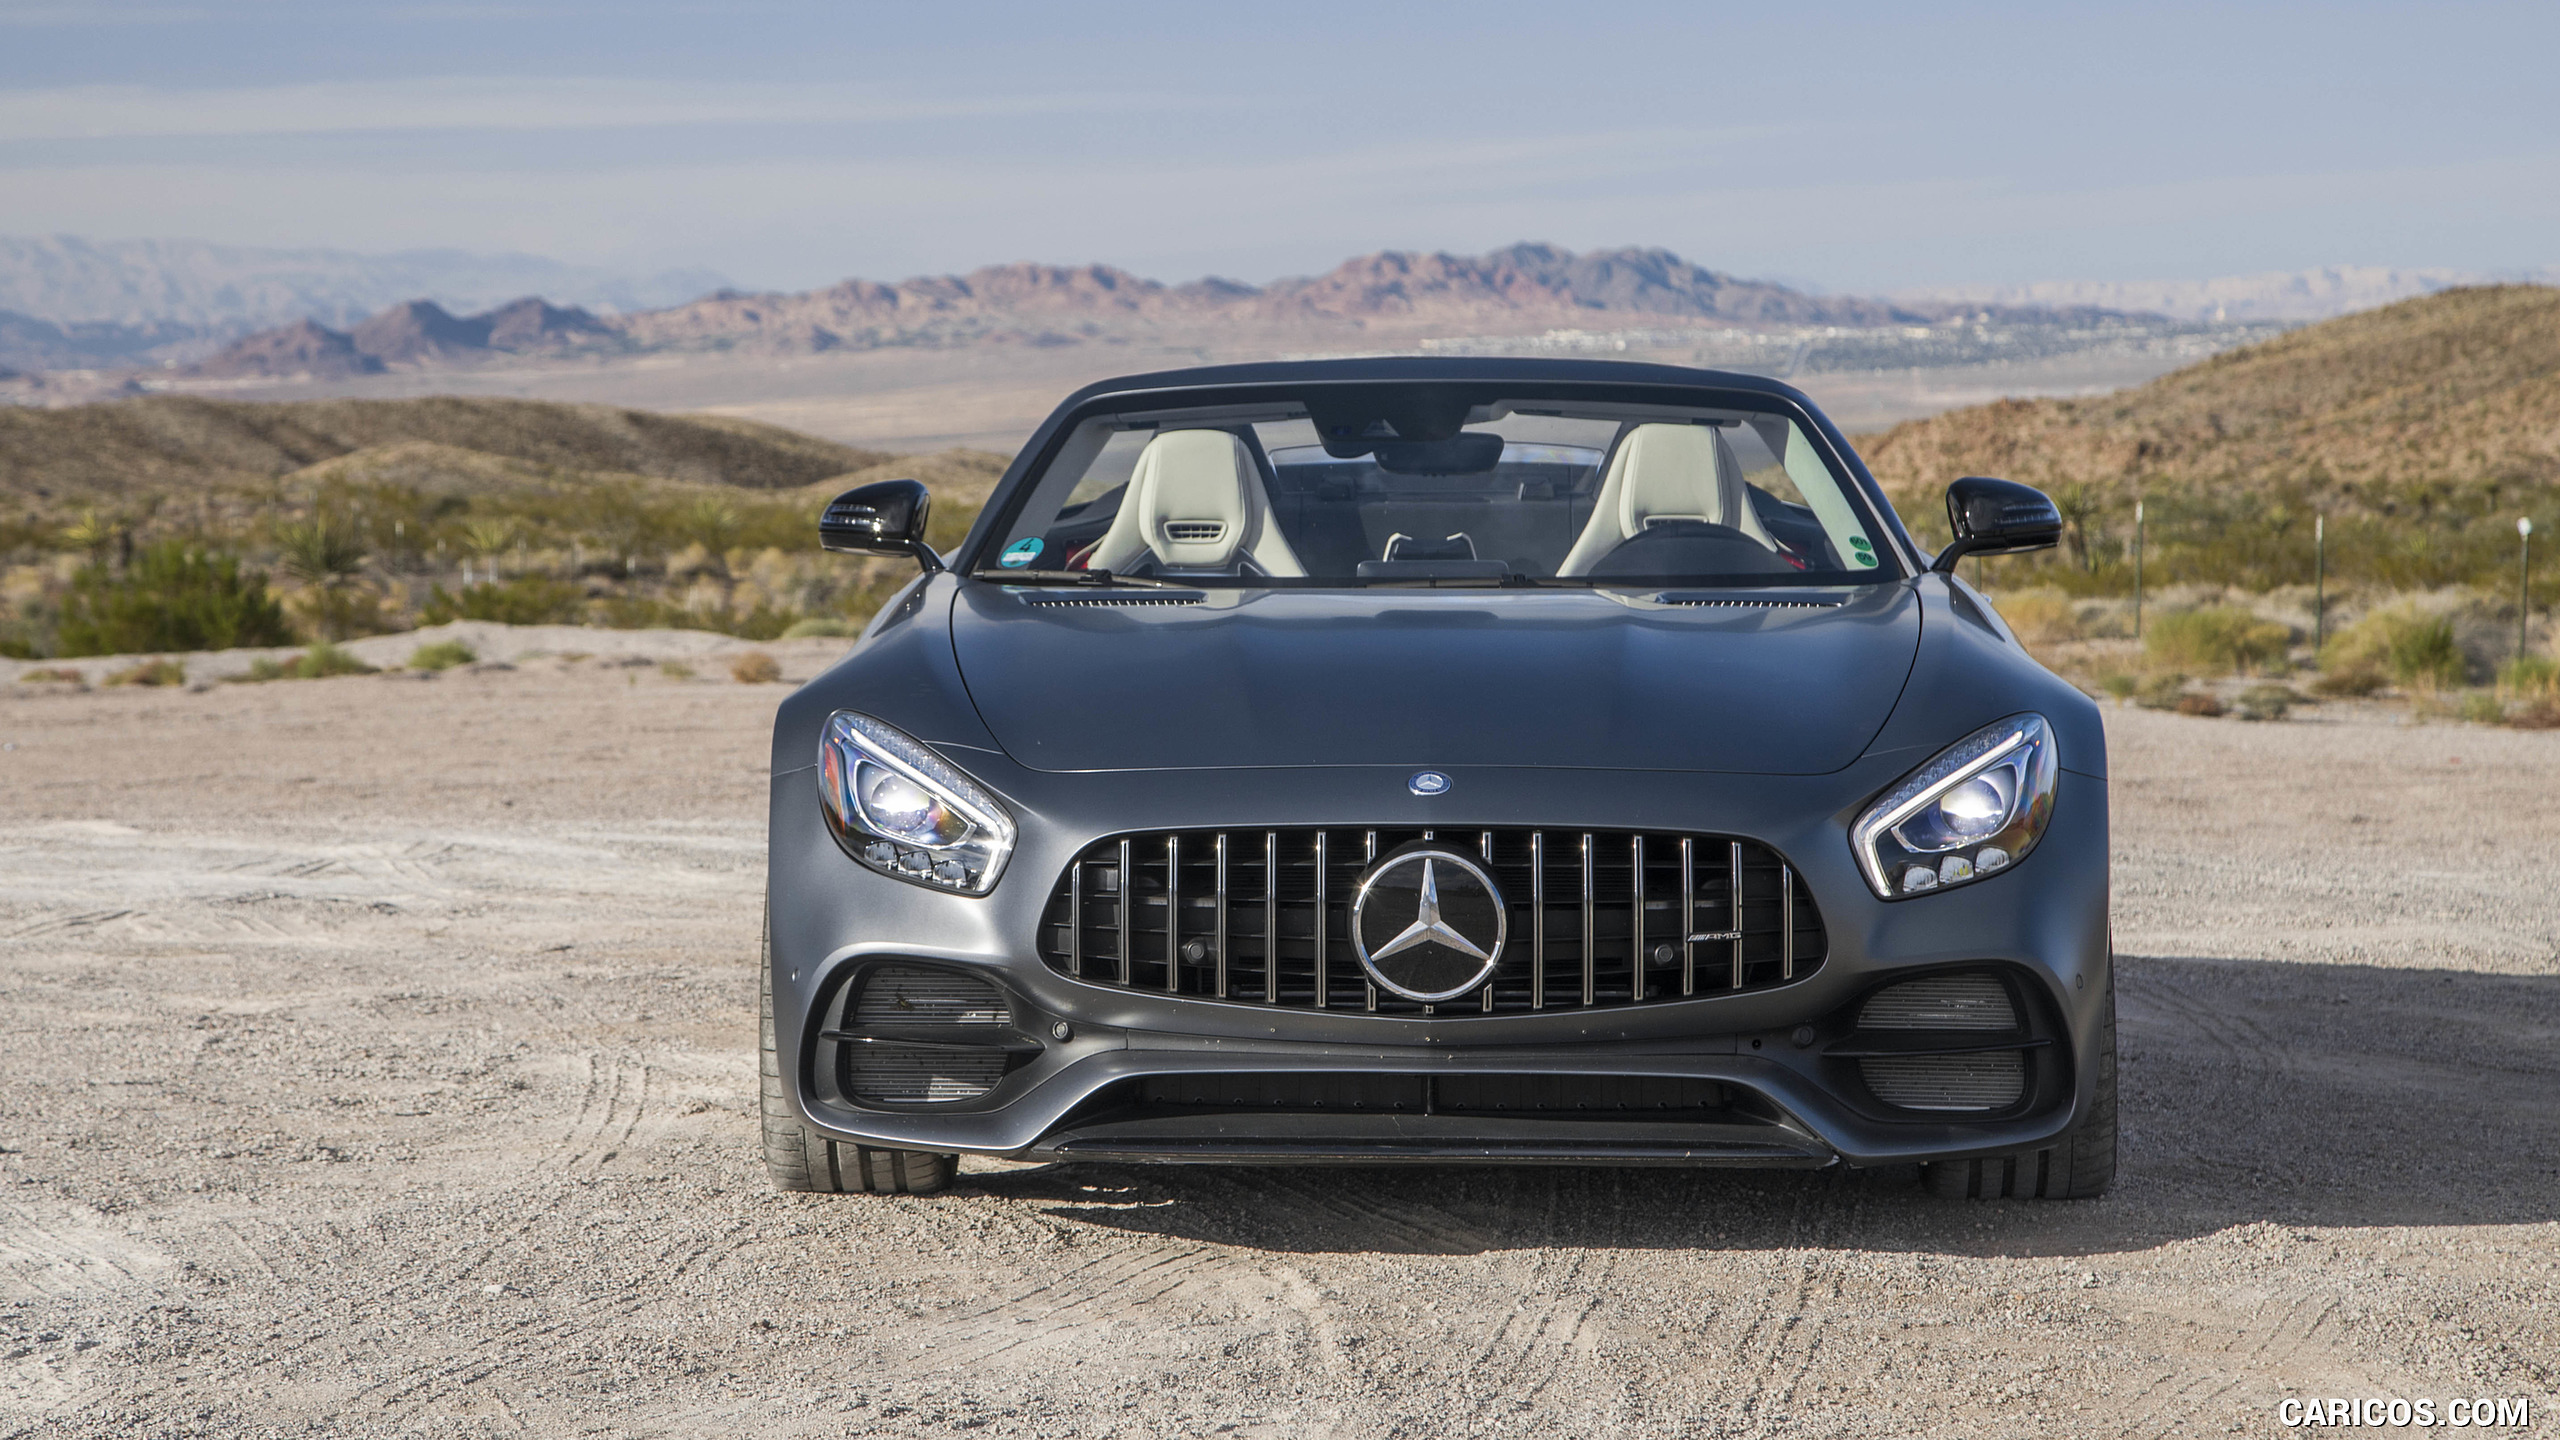 2018 Mercedes-AMG GT C Roadster - Front, #41 of 350